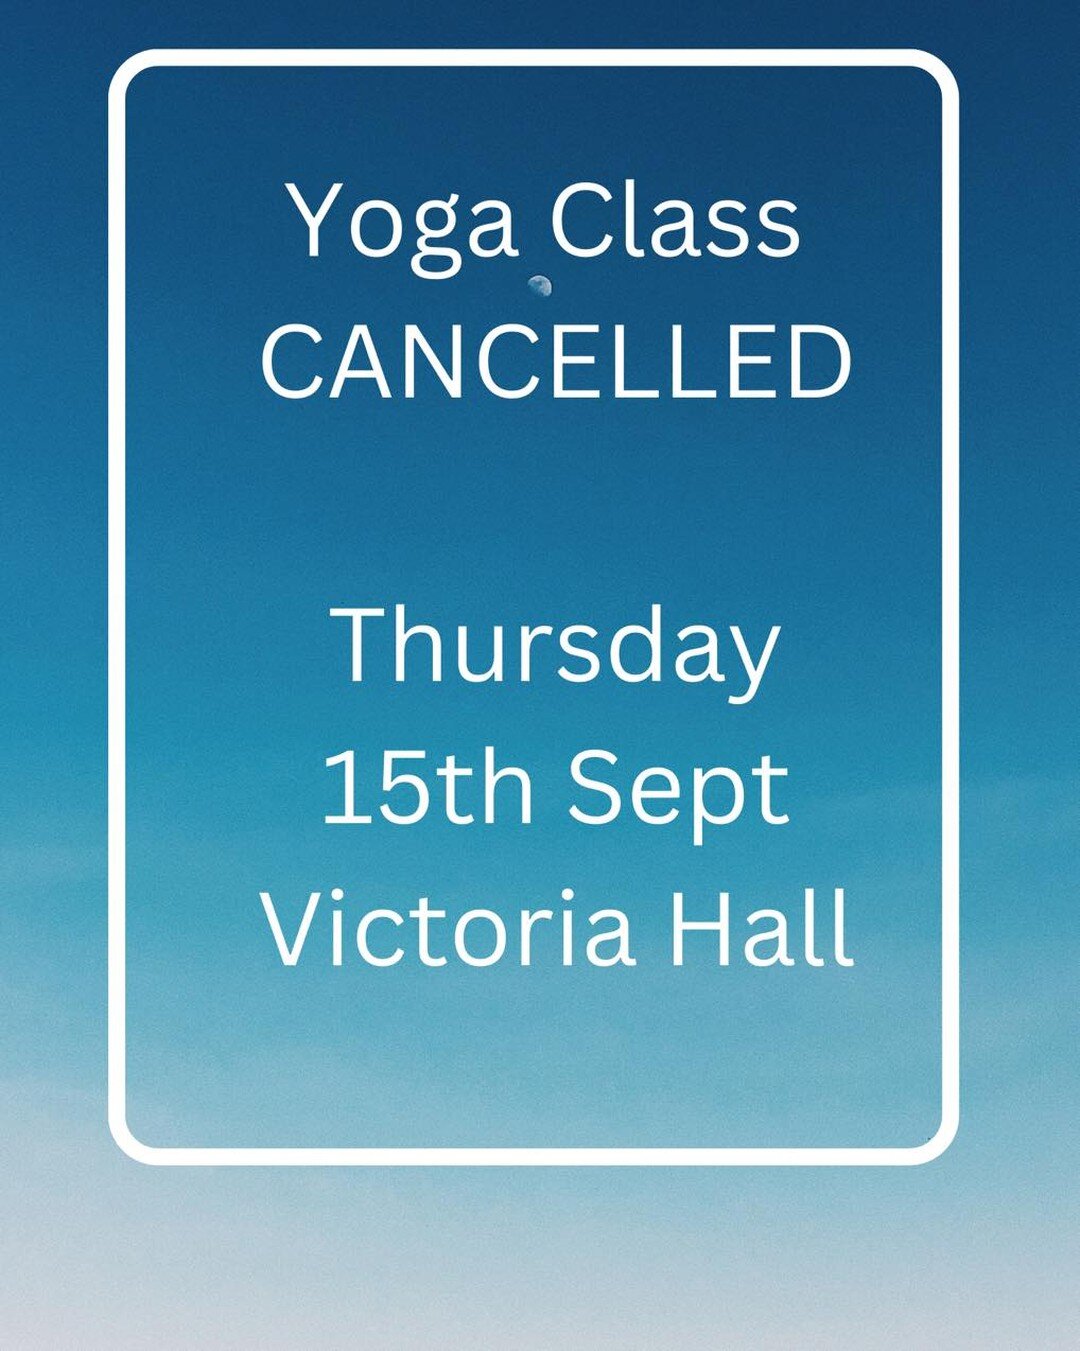 Just a reminder that there is no class tomorrow in Broseley due to a council meeting in the hall.  Back next week! X